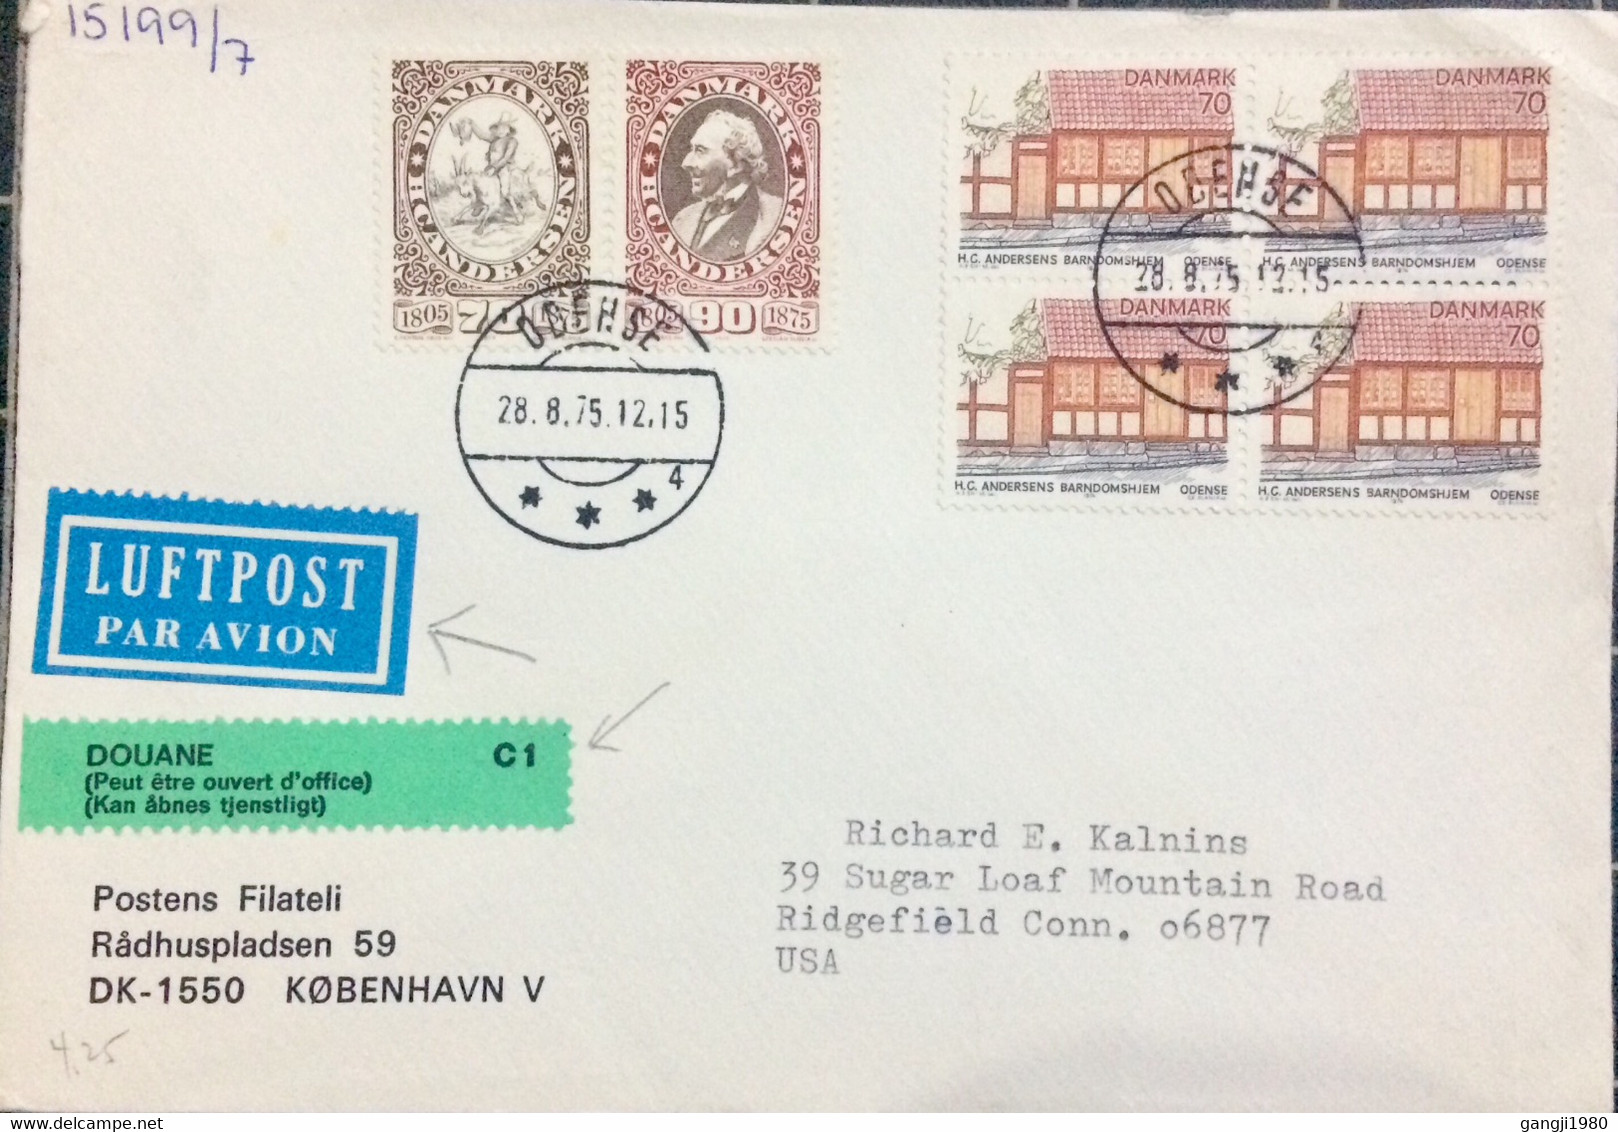 DENMARK 1975, COVER USED TO USA, NUMSKULL JACK, HANS ANDERSEN, ODENCE CITY CANCEL, AIRMAIL, DOUBLE & CUSTOMS LABEL - Covers & Documents